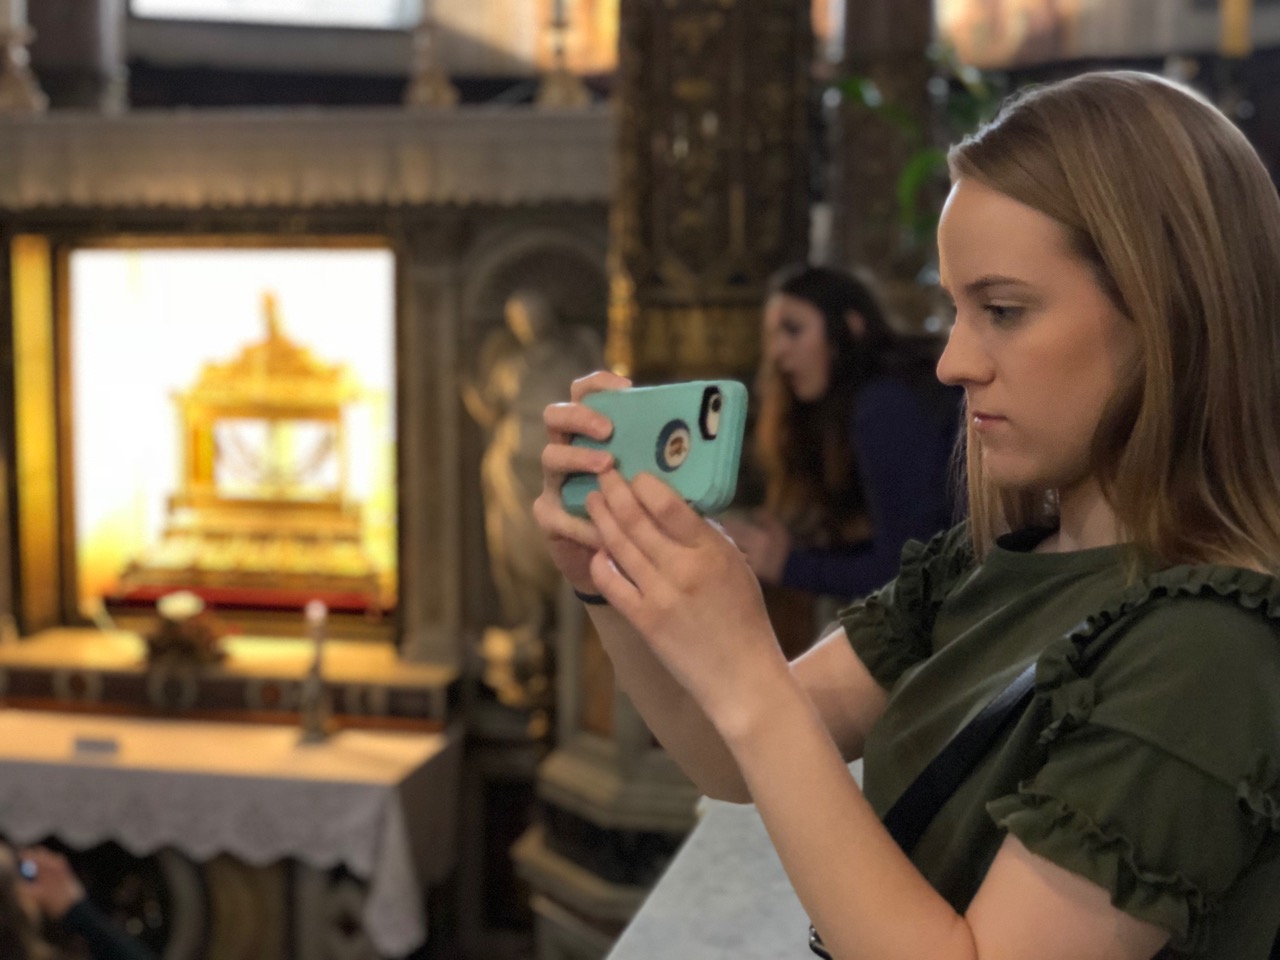 A student takes a picture with a phone inside of a museum.